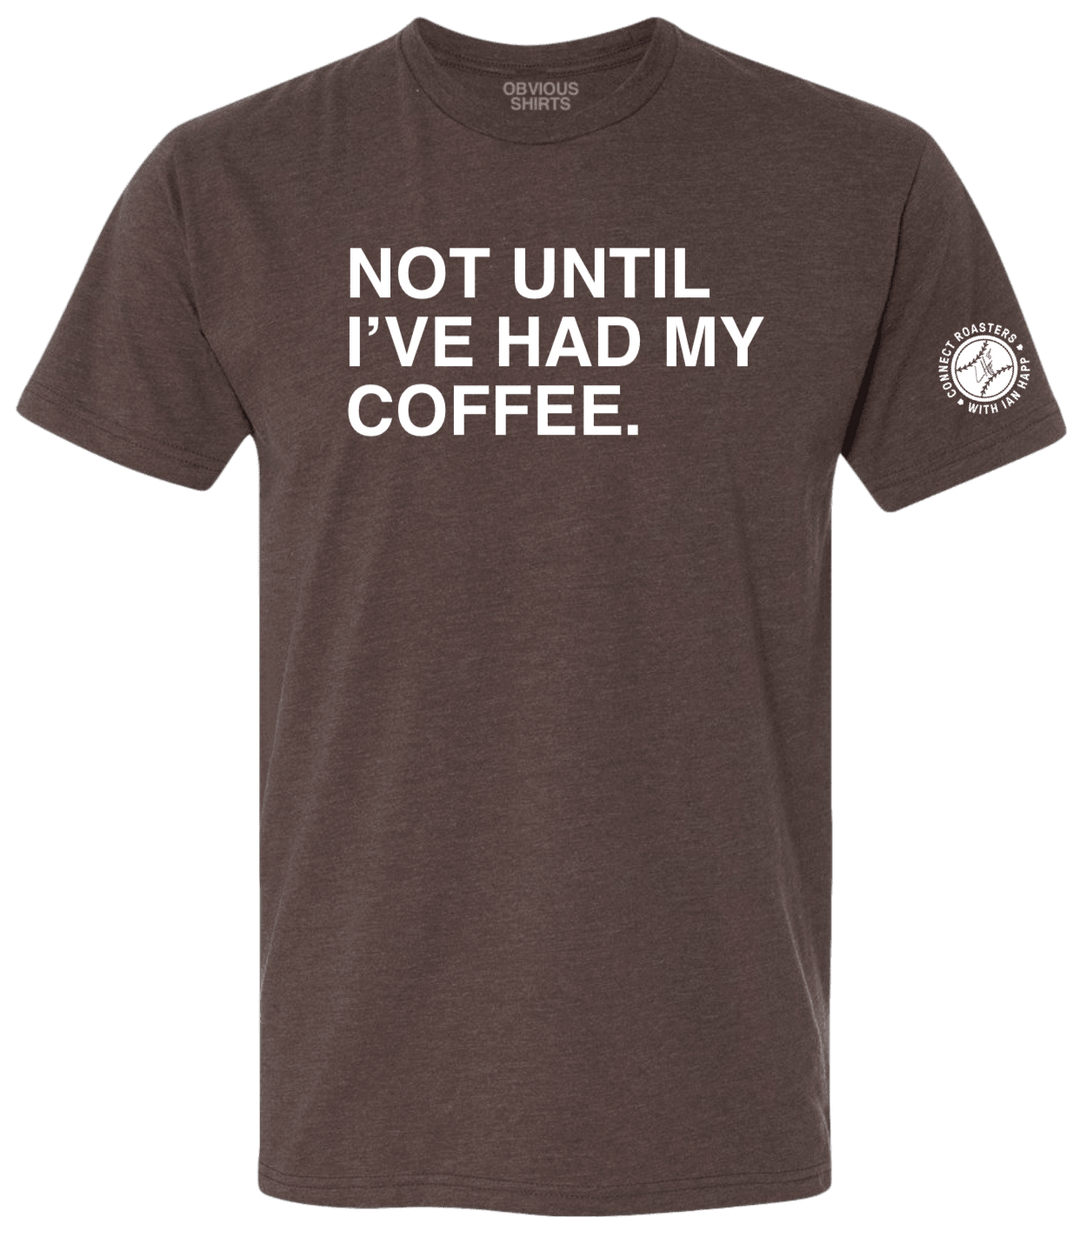 NOT UNTIL I'VE HAD MY COFFEE. - OBVIOUS SHIRTS.